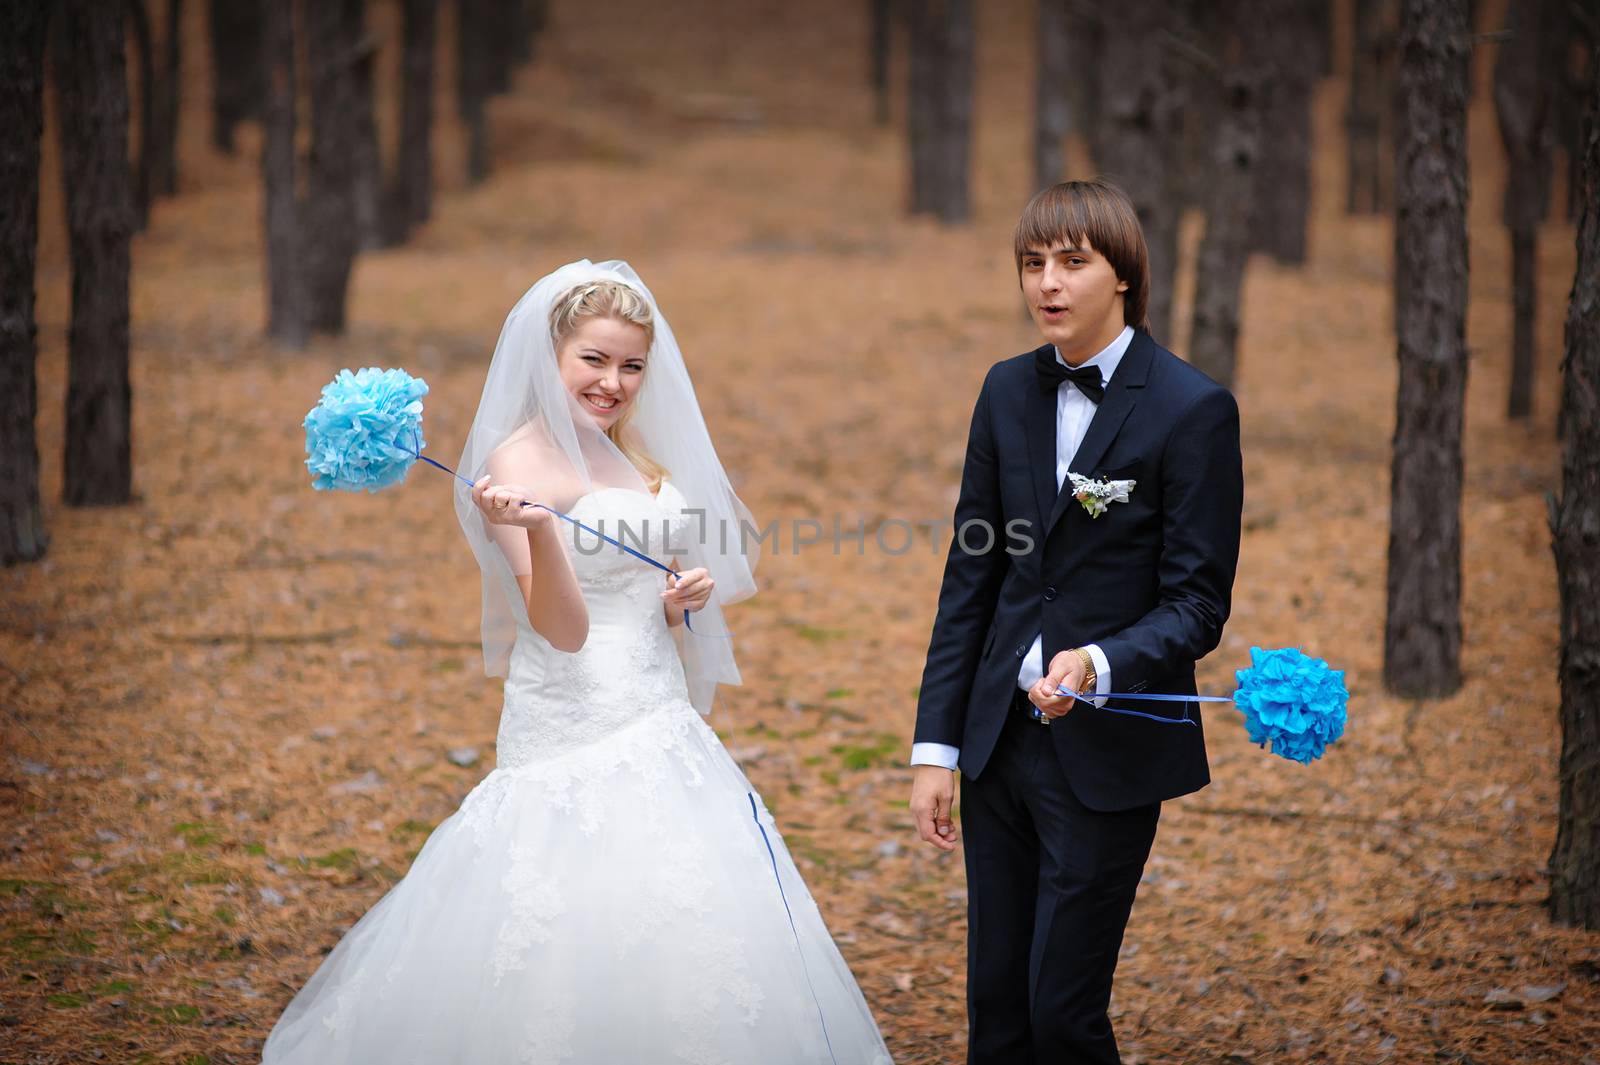 sunlight bride and groom standing in a pine forest in autumn.